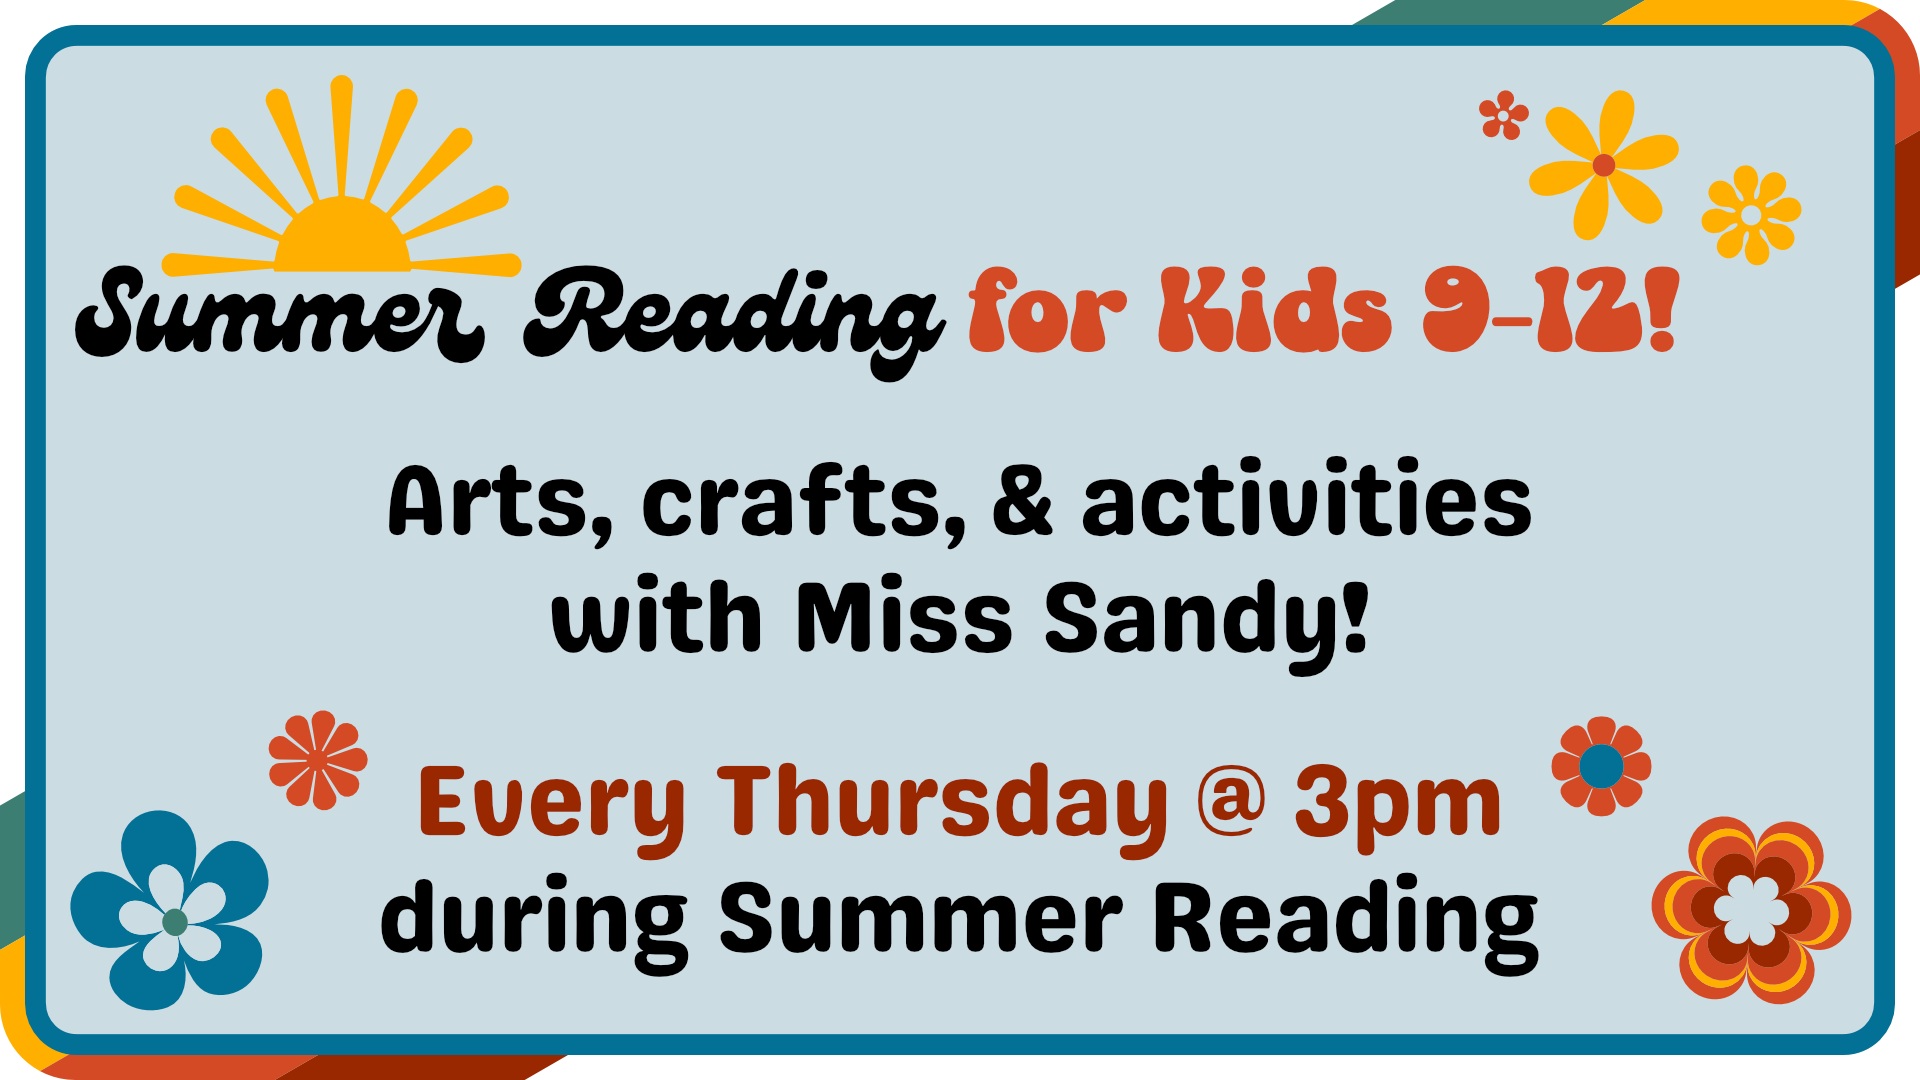 Summer Reading for kids 9-12, every Thursday at 3pm